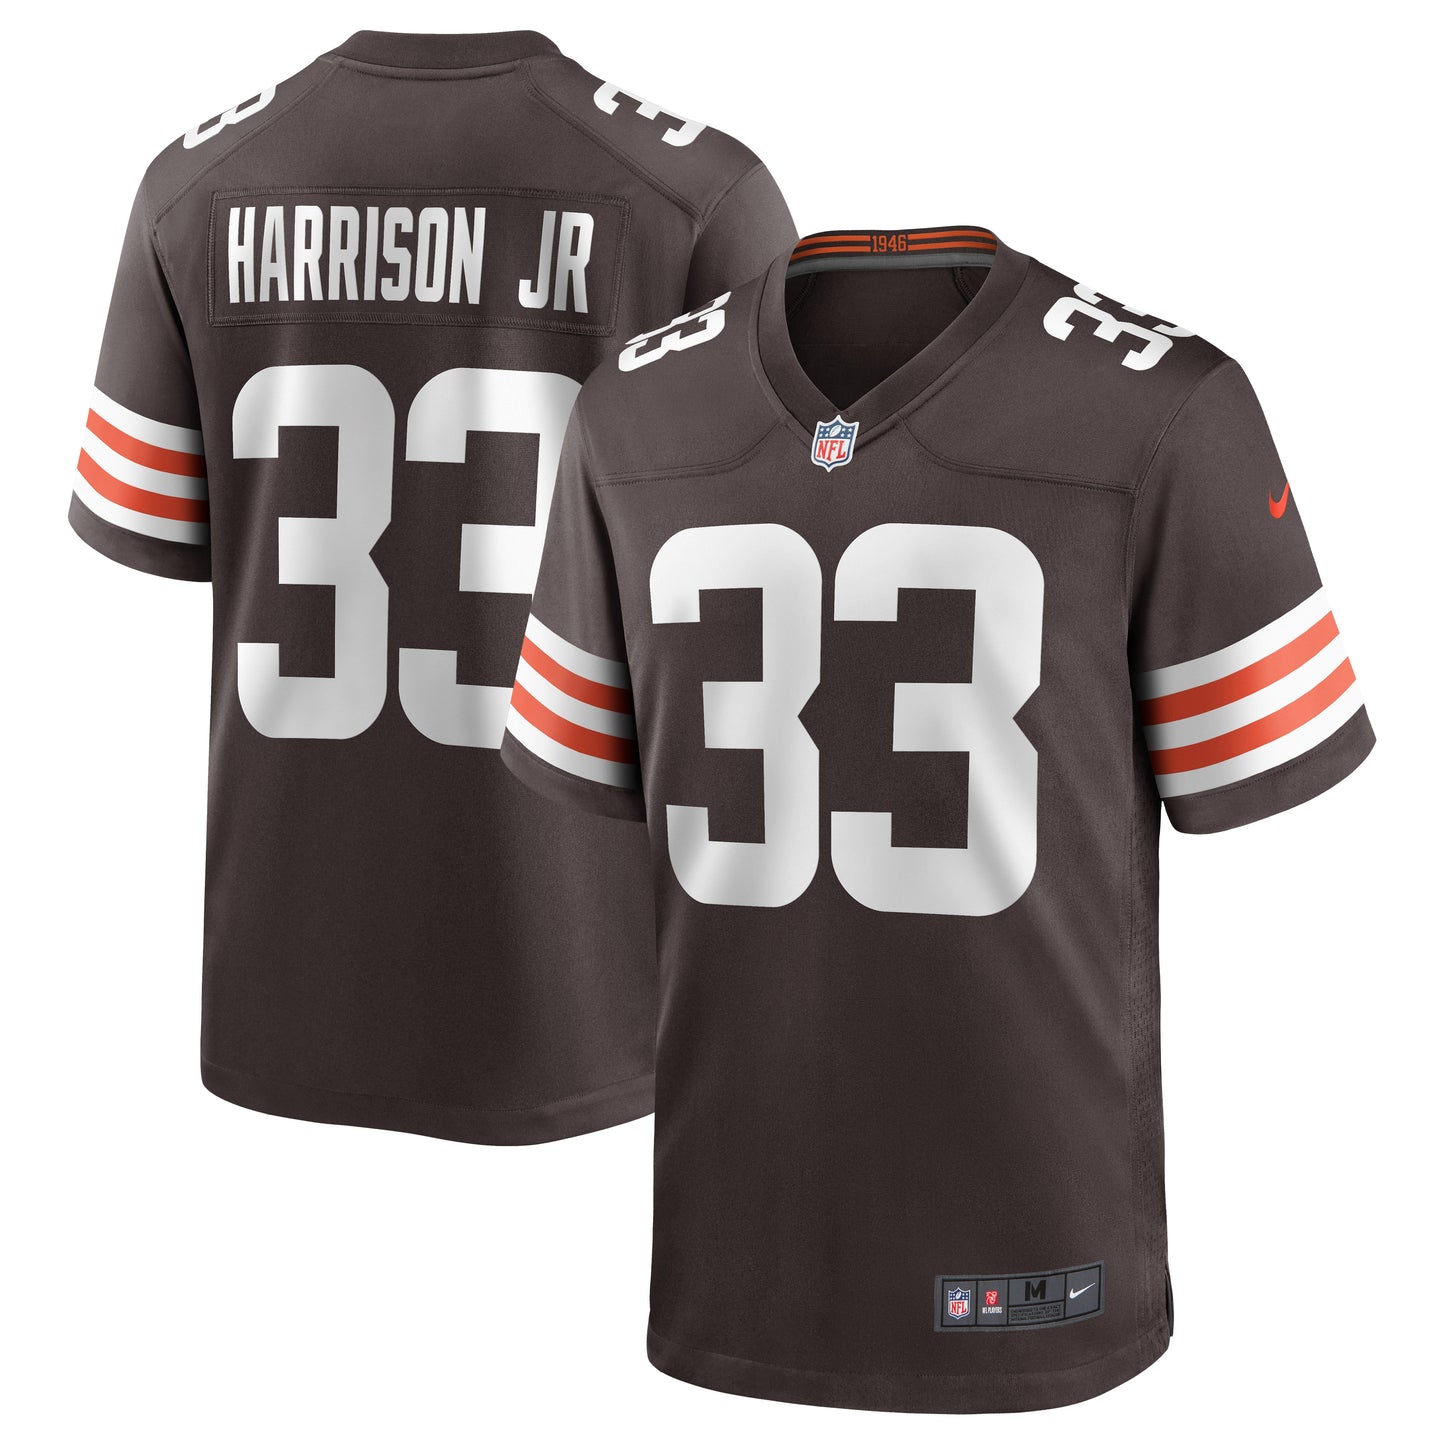 Ronnie Harrison Jr. Cleveland Browns Nike Game Jersey - Brown